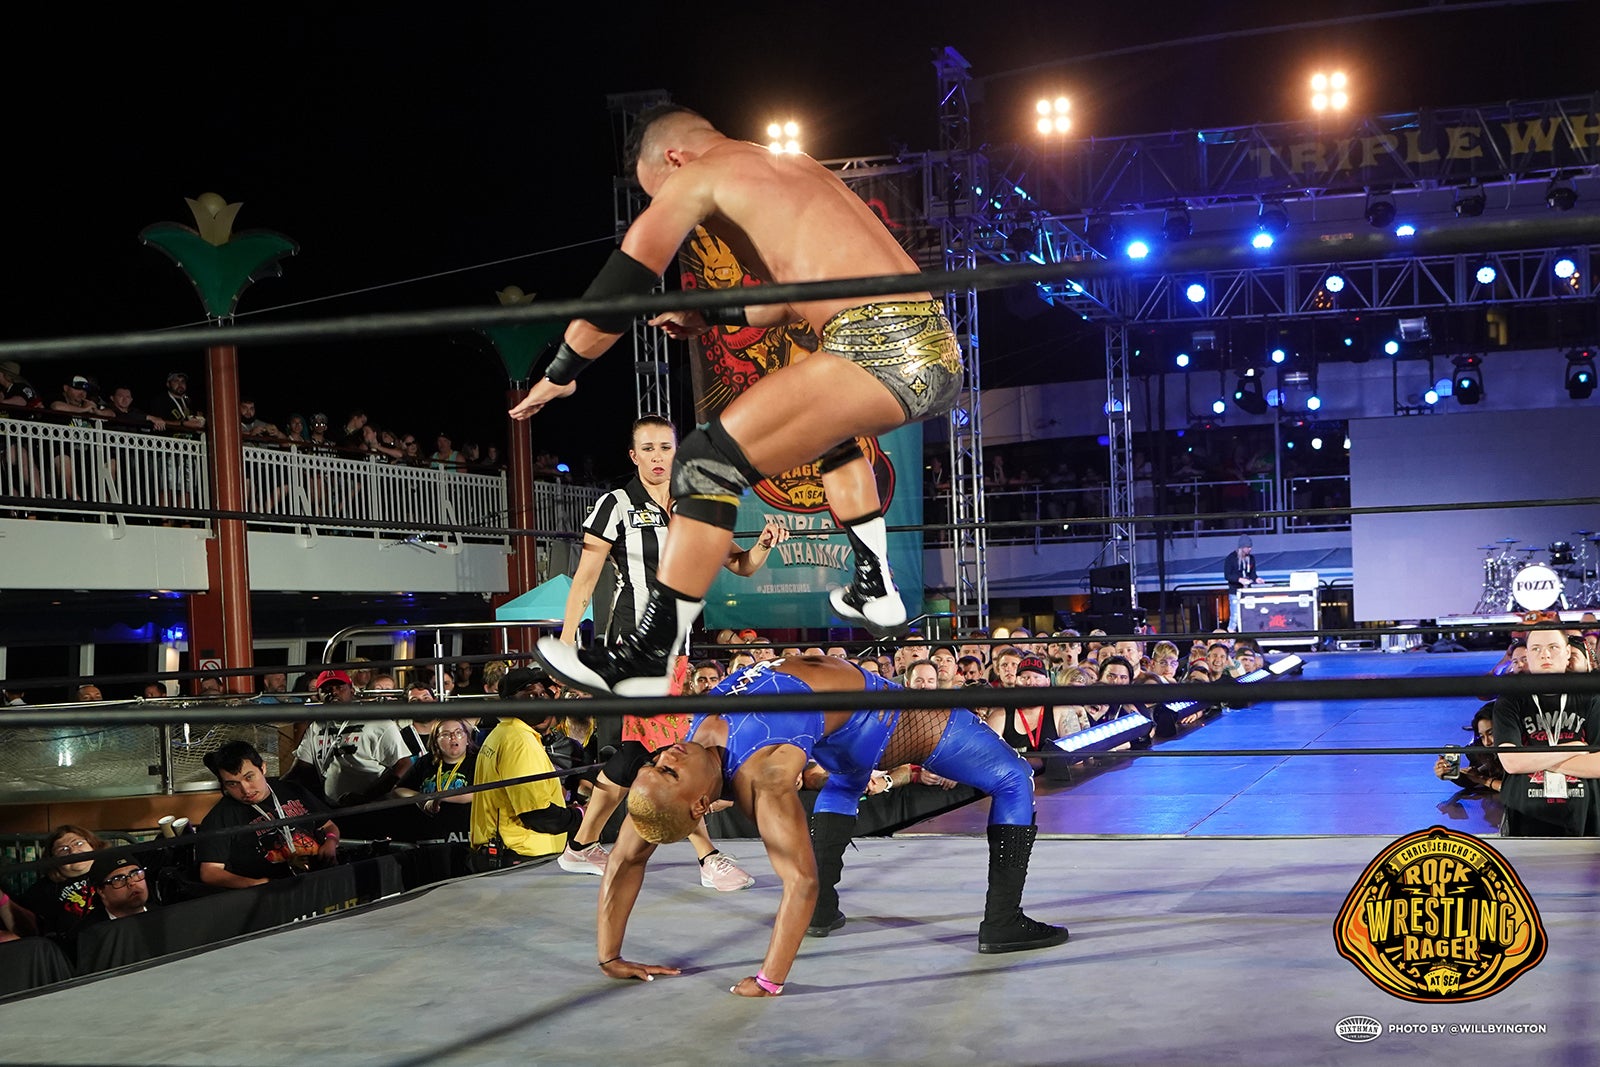 Wrestlers on a cruise ship